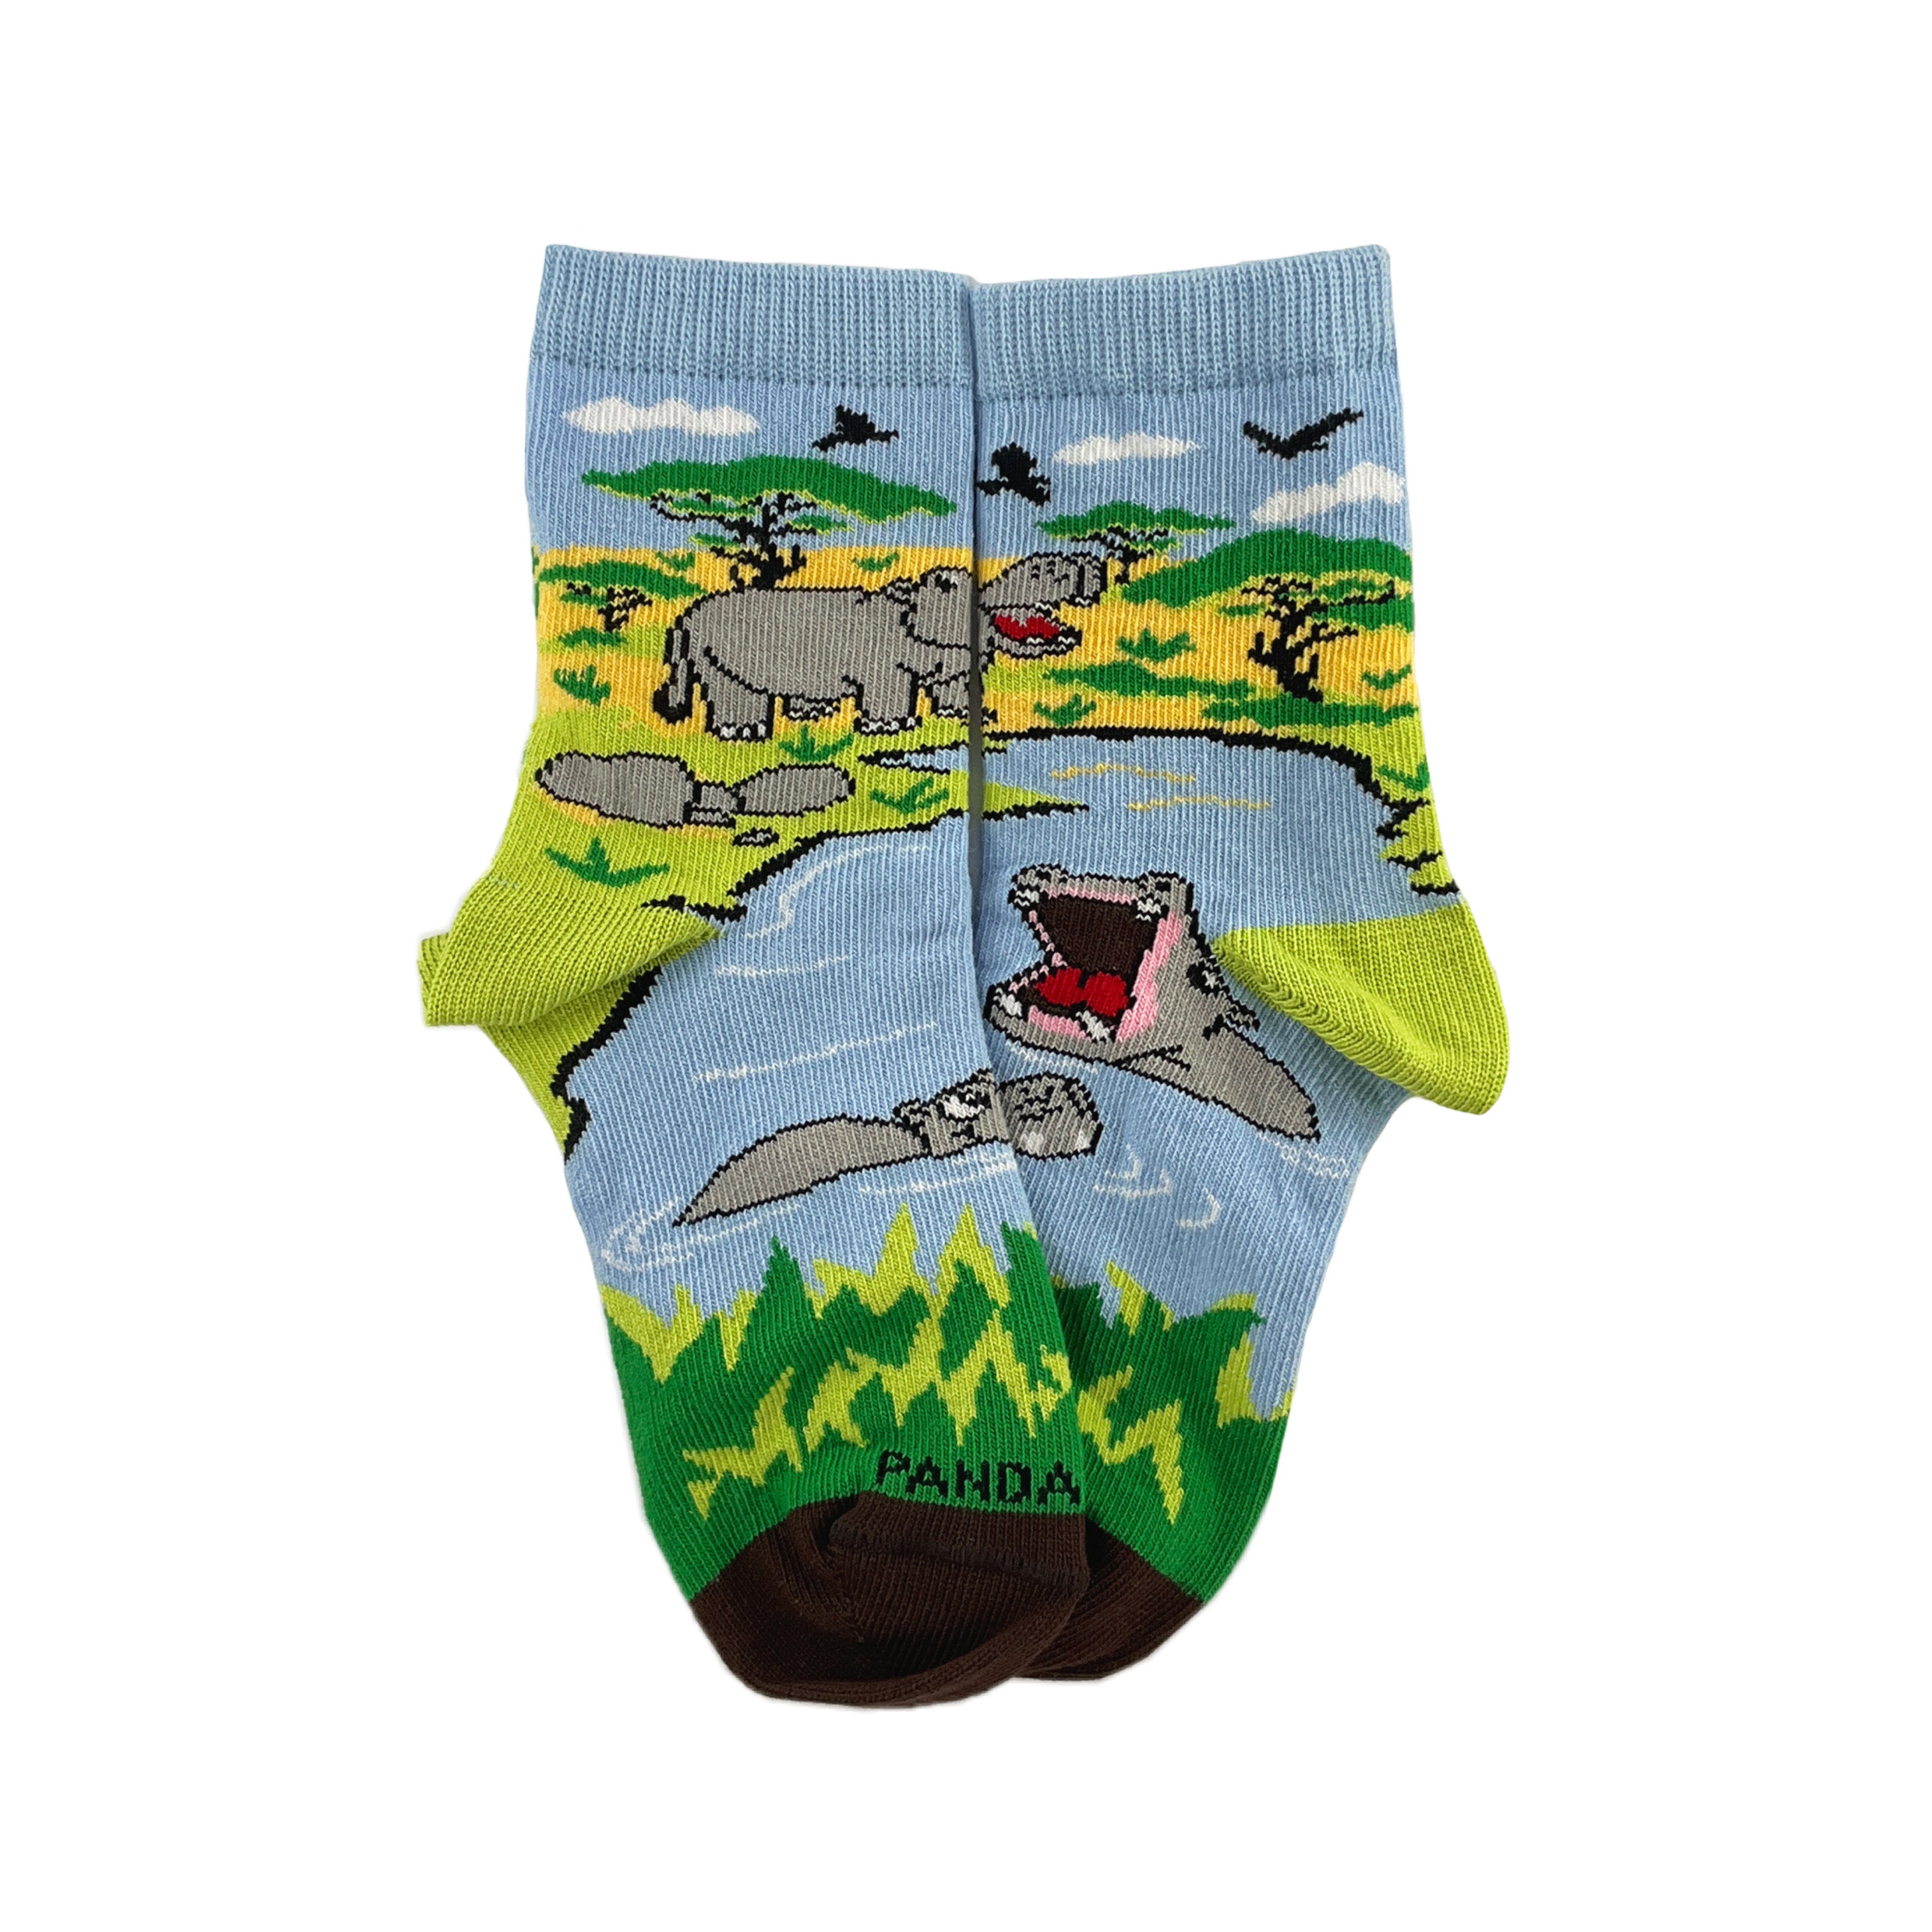 Hippos Playing in a Pond Socks from the Sock Panda (Ages 3-7)